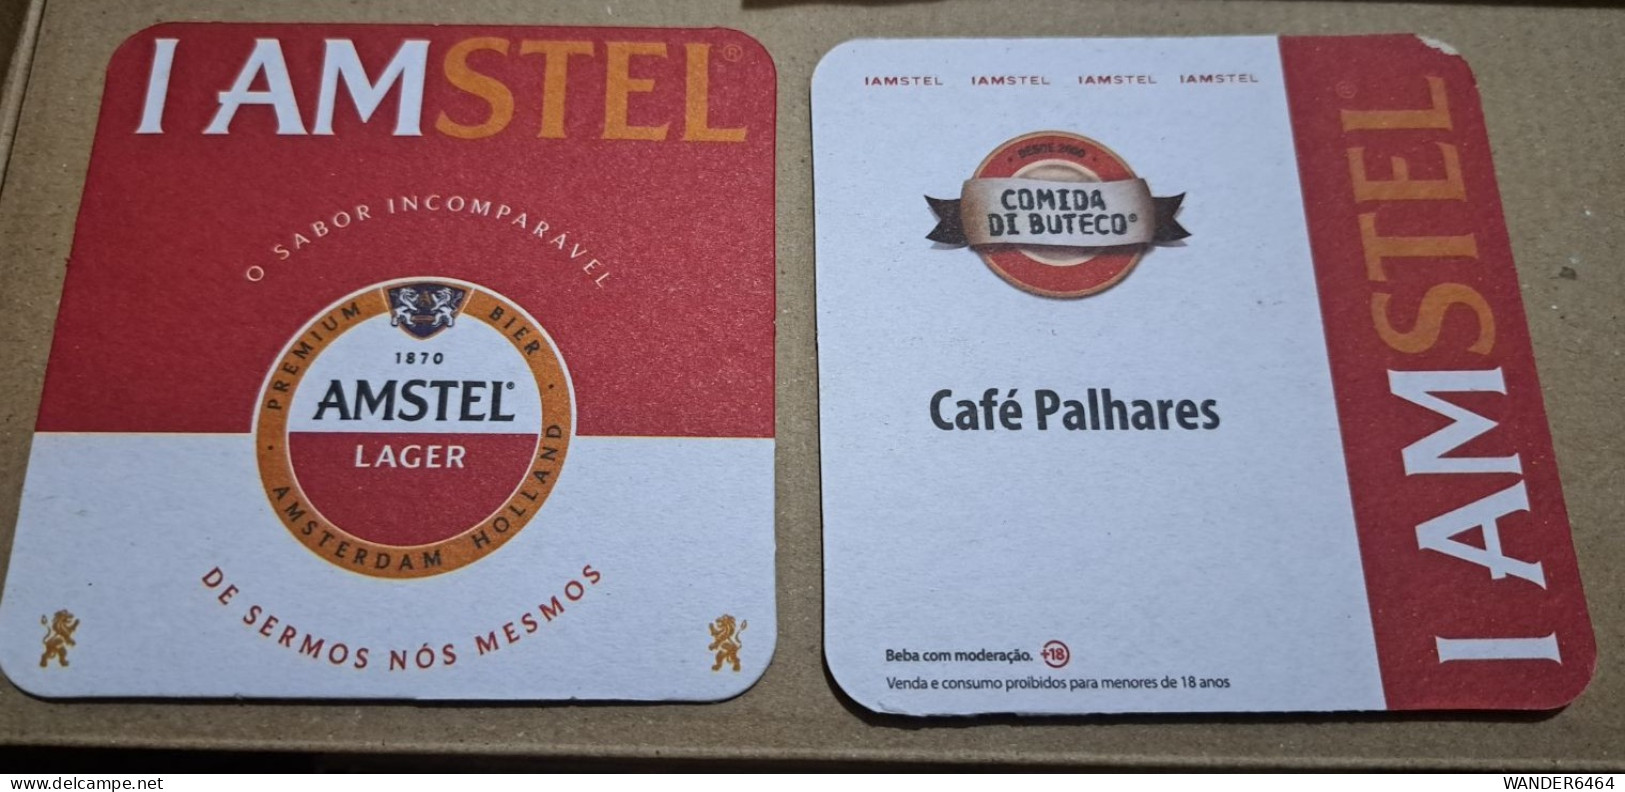 AMSTEL HISTORIC SET BRAZIL BREWERY  BEER  MATS - COASTERS #051 CAFÉ PALHARES BAR - Sotto-boccale